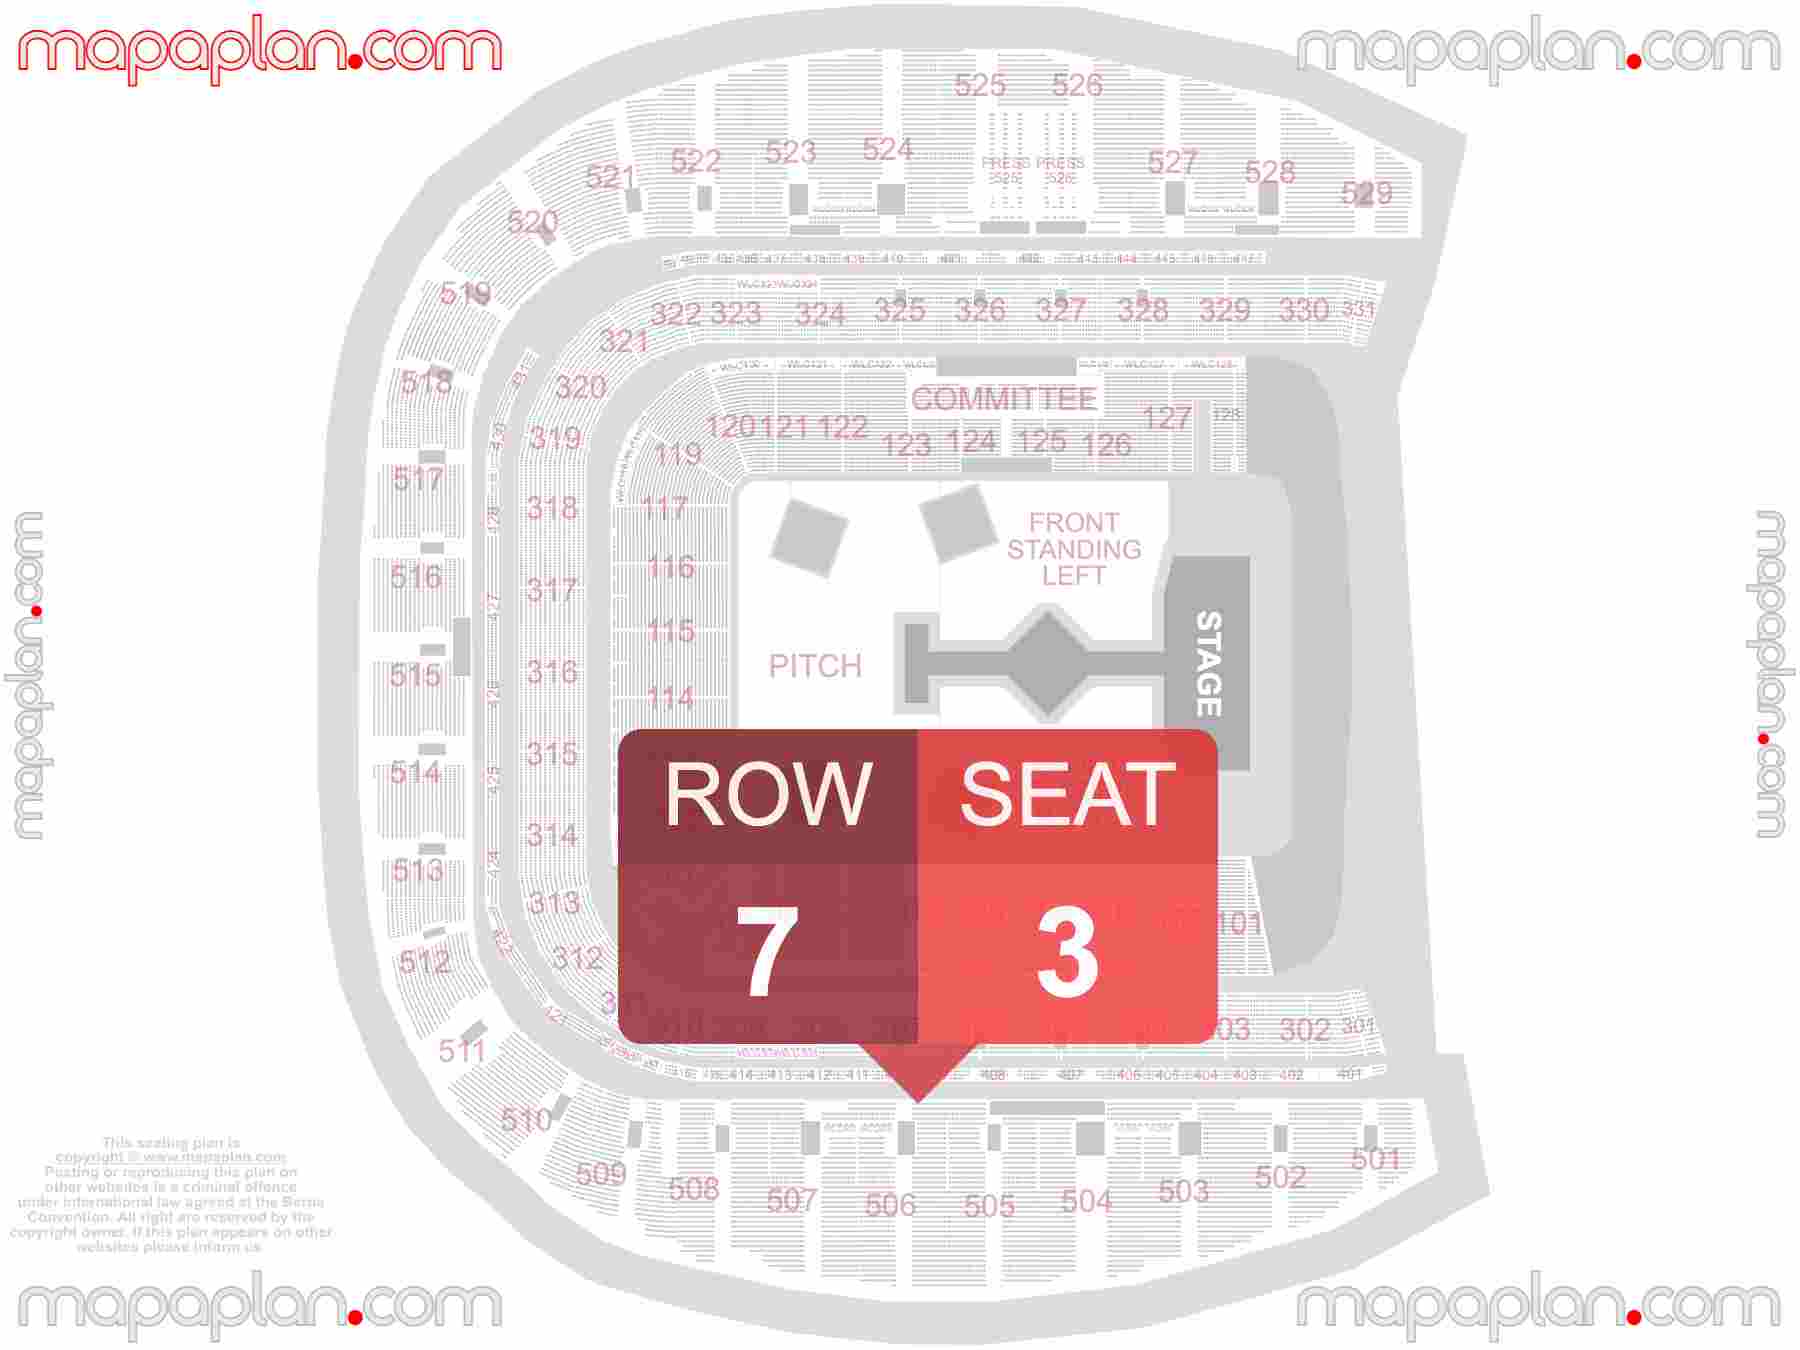 Dublin Aviva Stadium seating plan Concert seating plan with exact section numbers showing best rows and seats selection 3d layout - Best interactive seat finder tool with precise detailed location data